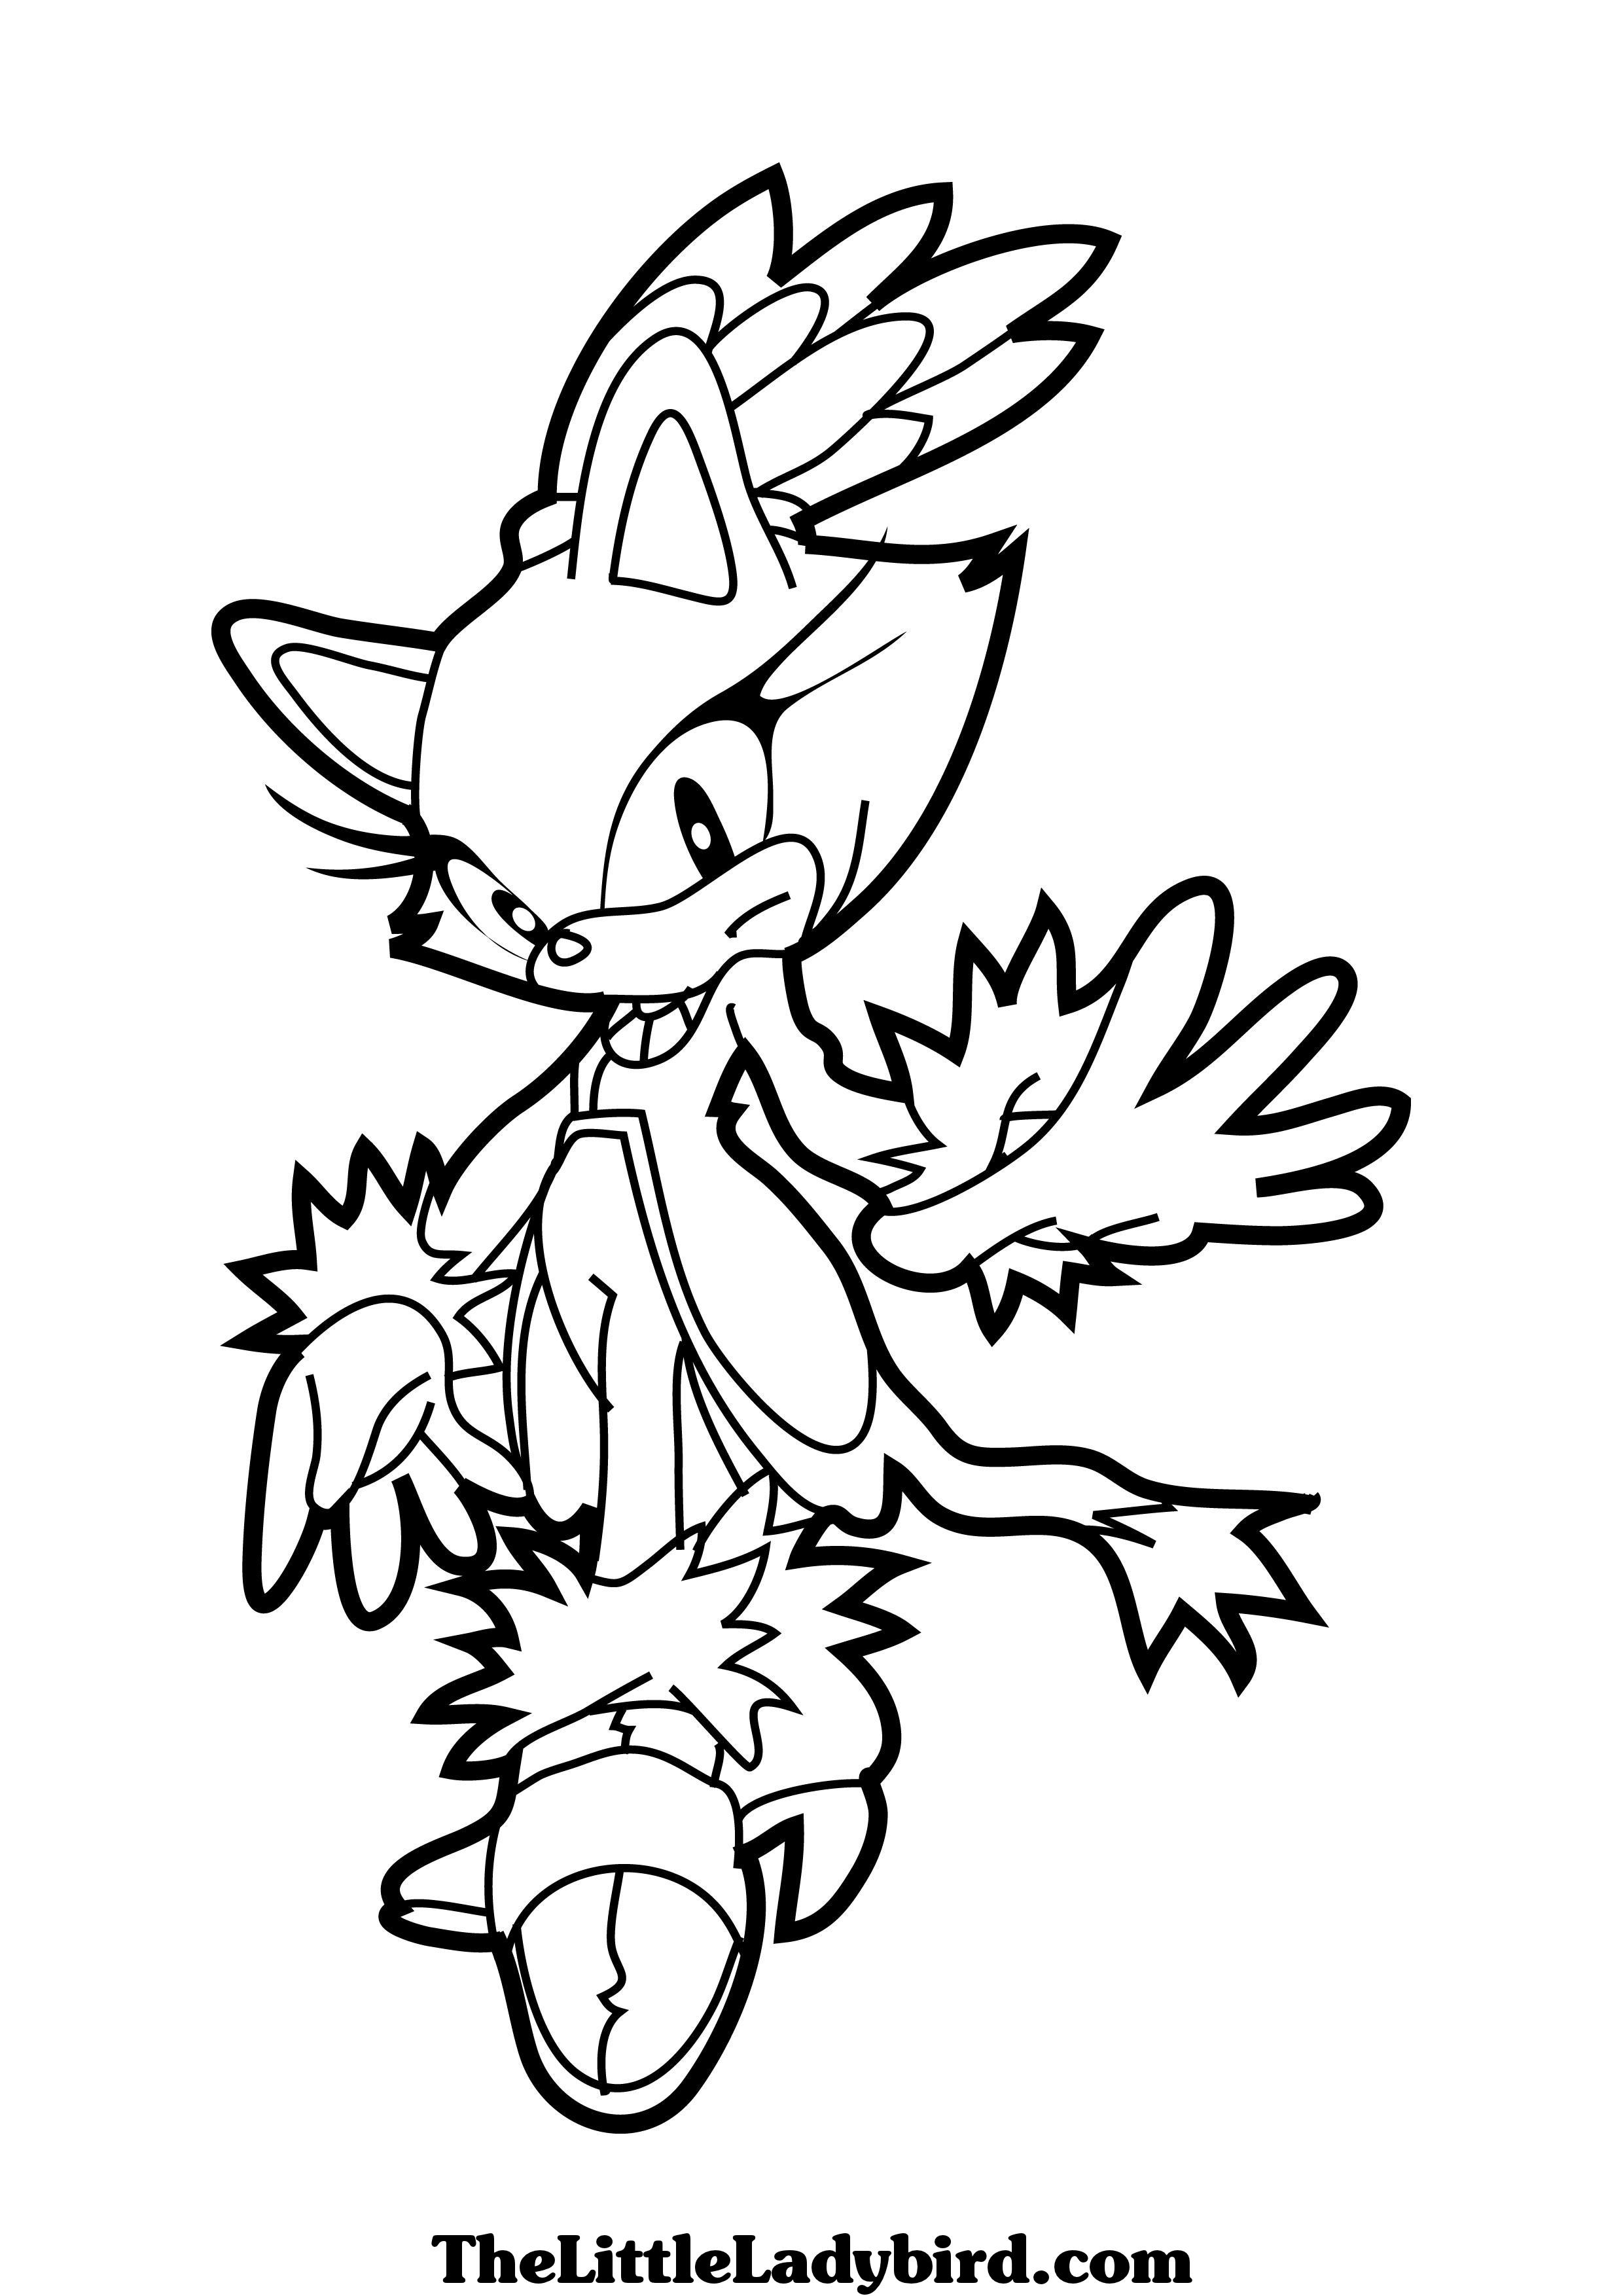  Sonic coloring pages | disney coloring pages for kids | color pages | coloring pages to print | kids coloring pages | #46